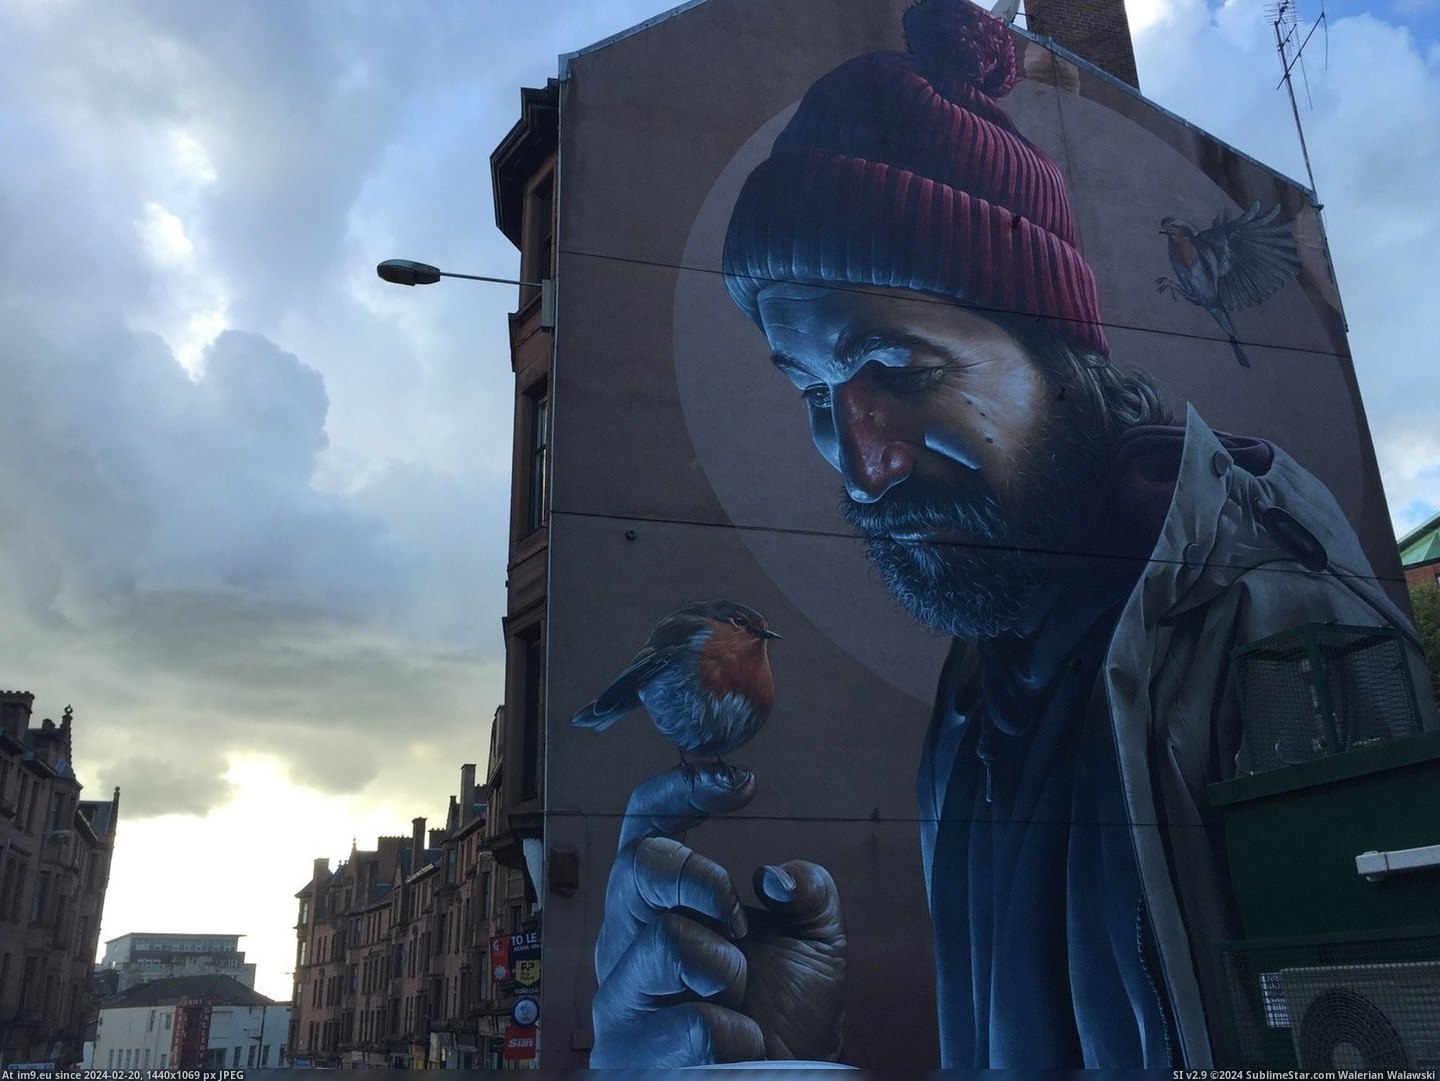 [Pics] Outstanding mural in Glasgow, Scotland (in My r/PICS favs)